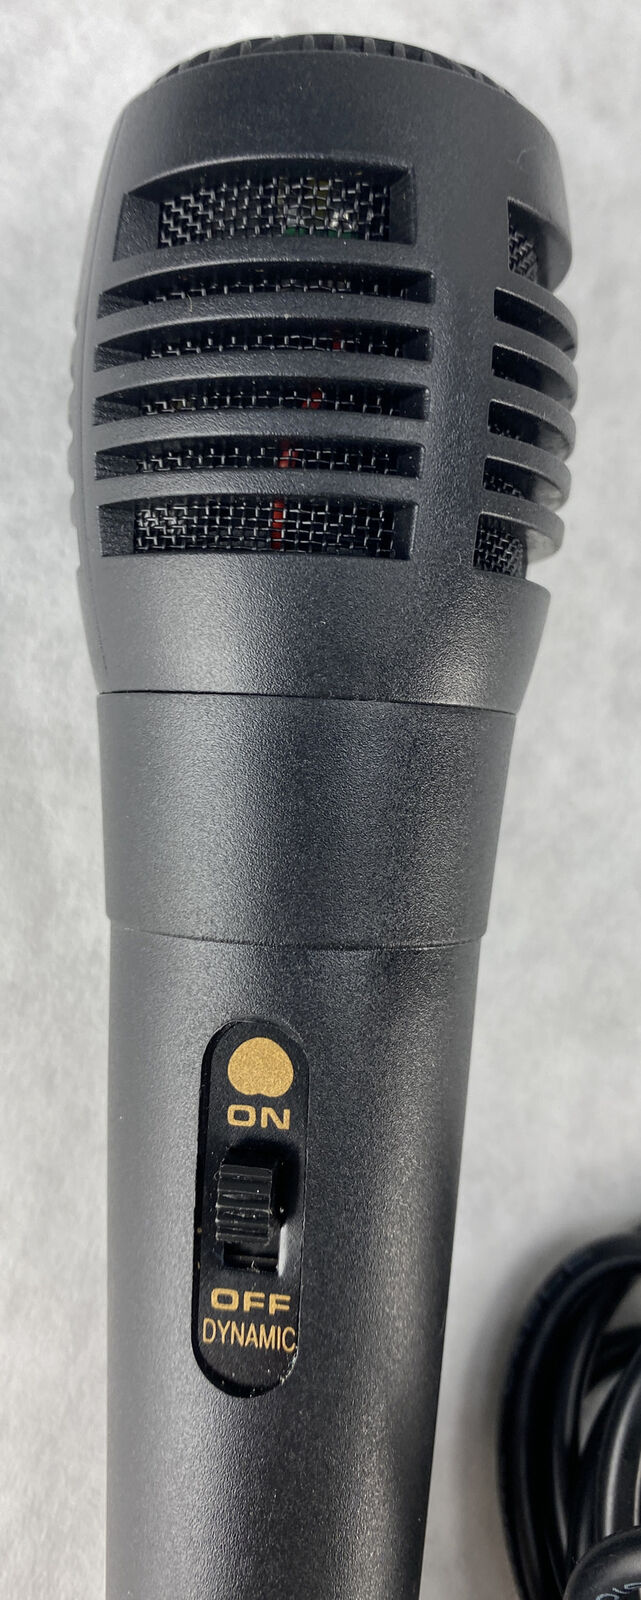 Altec Lansing Dynamic Microphone UNTESTED